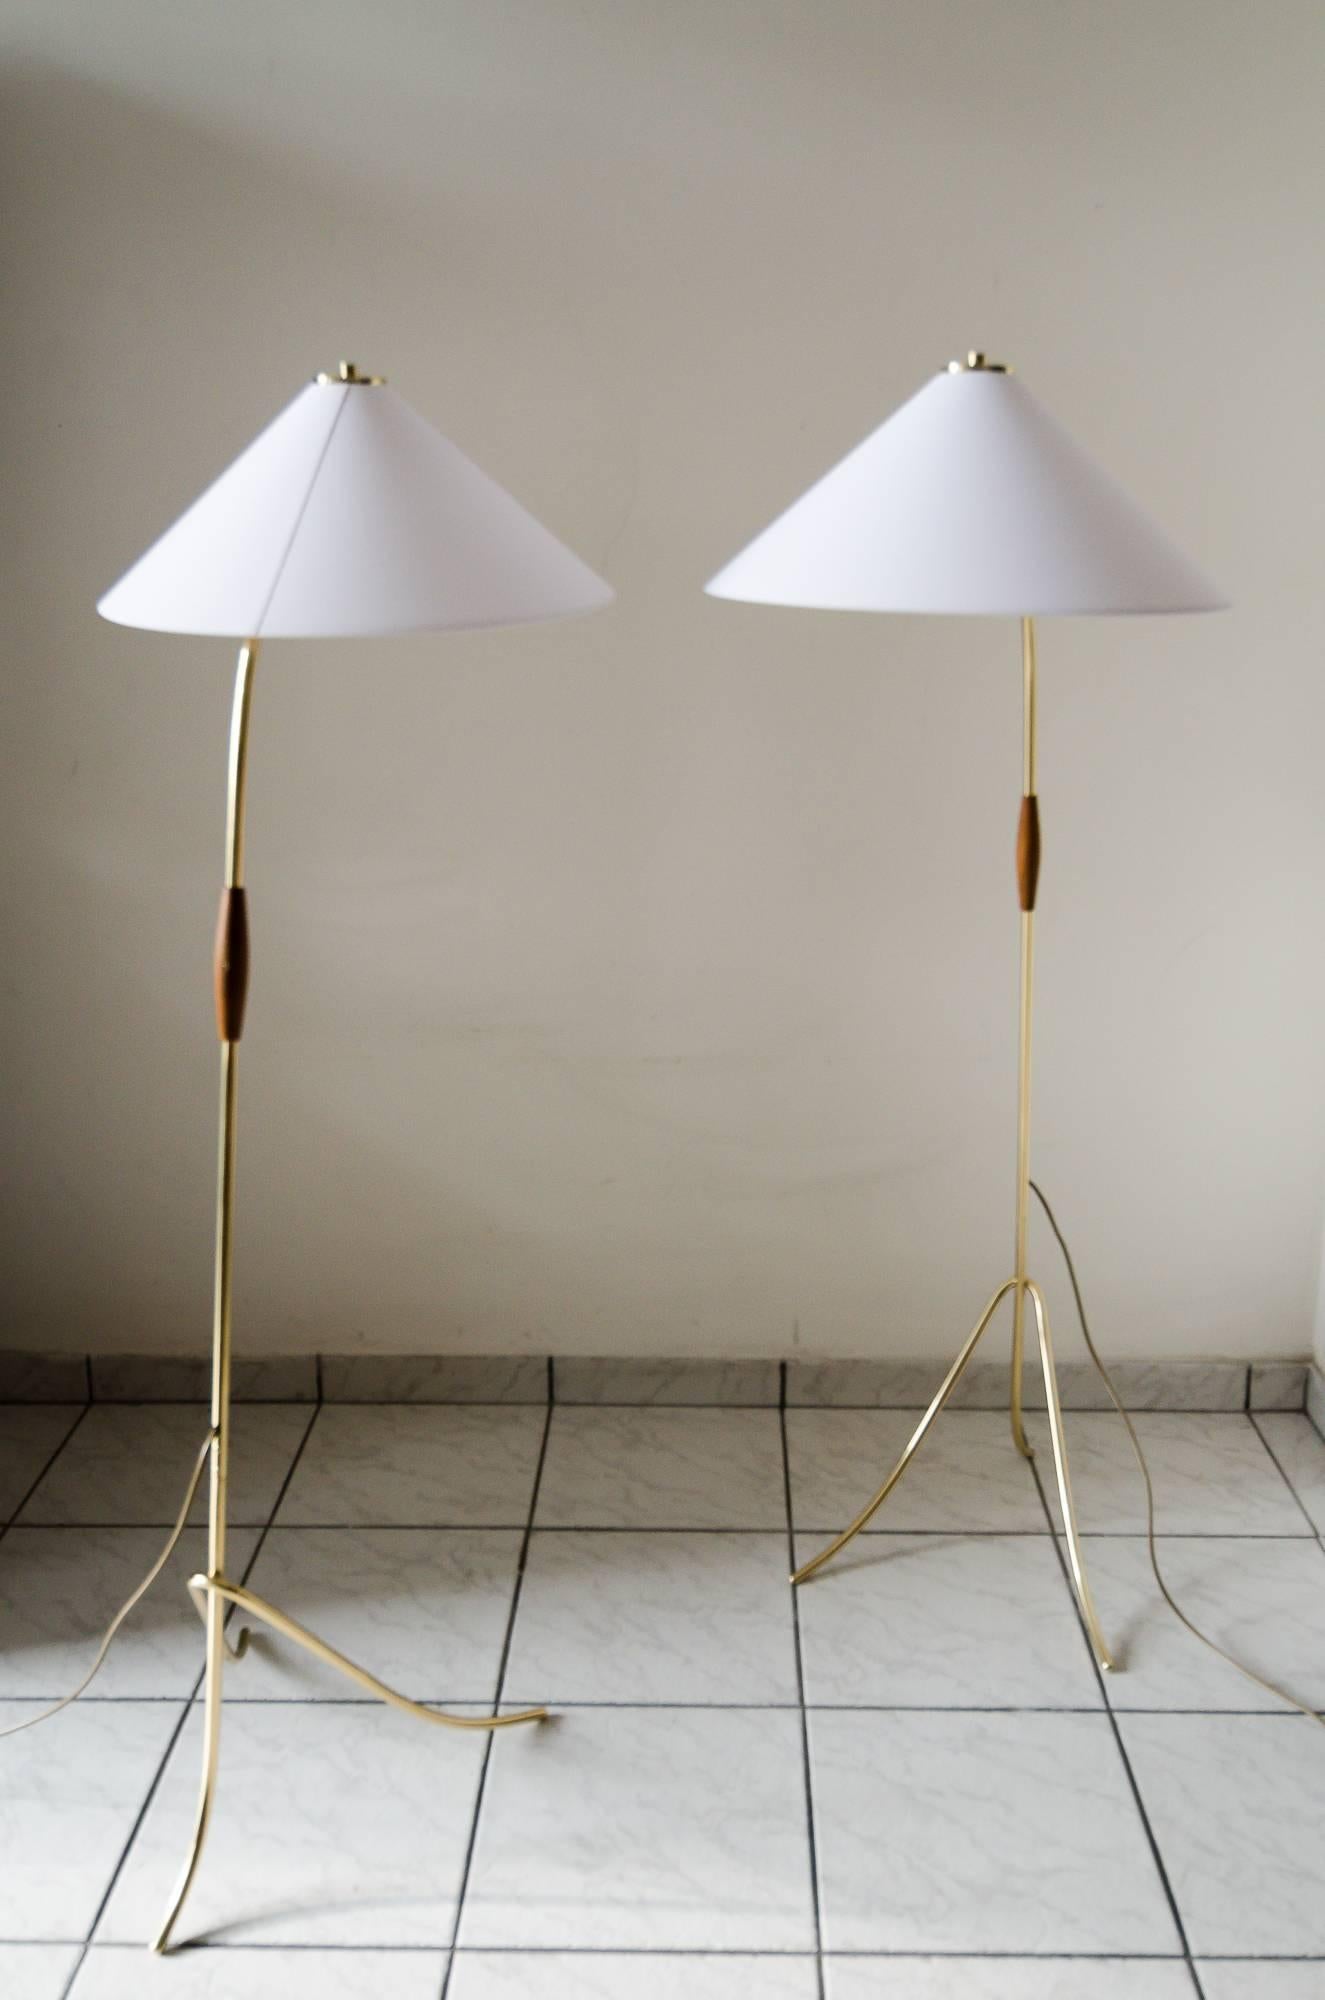 A pair of floor lamps by Rupert Nikoll, Vienna, 1950.
Polished and stove enameled
The lampshades have been renewed as well based on the original dimensions.